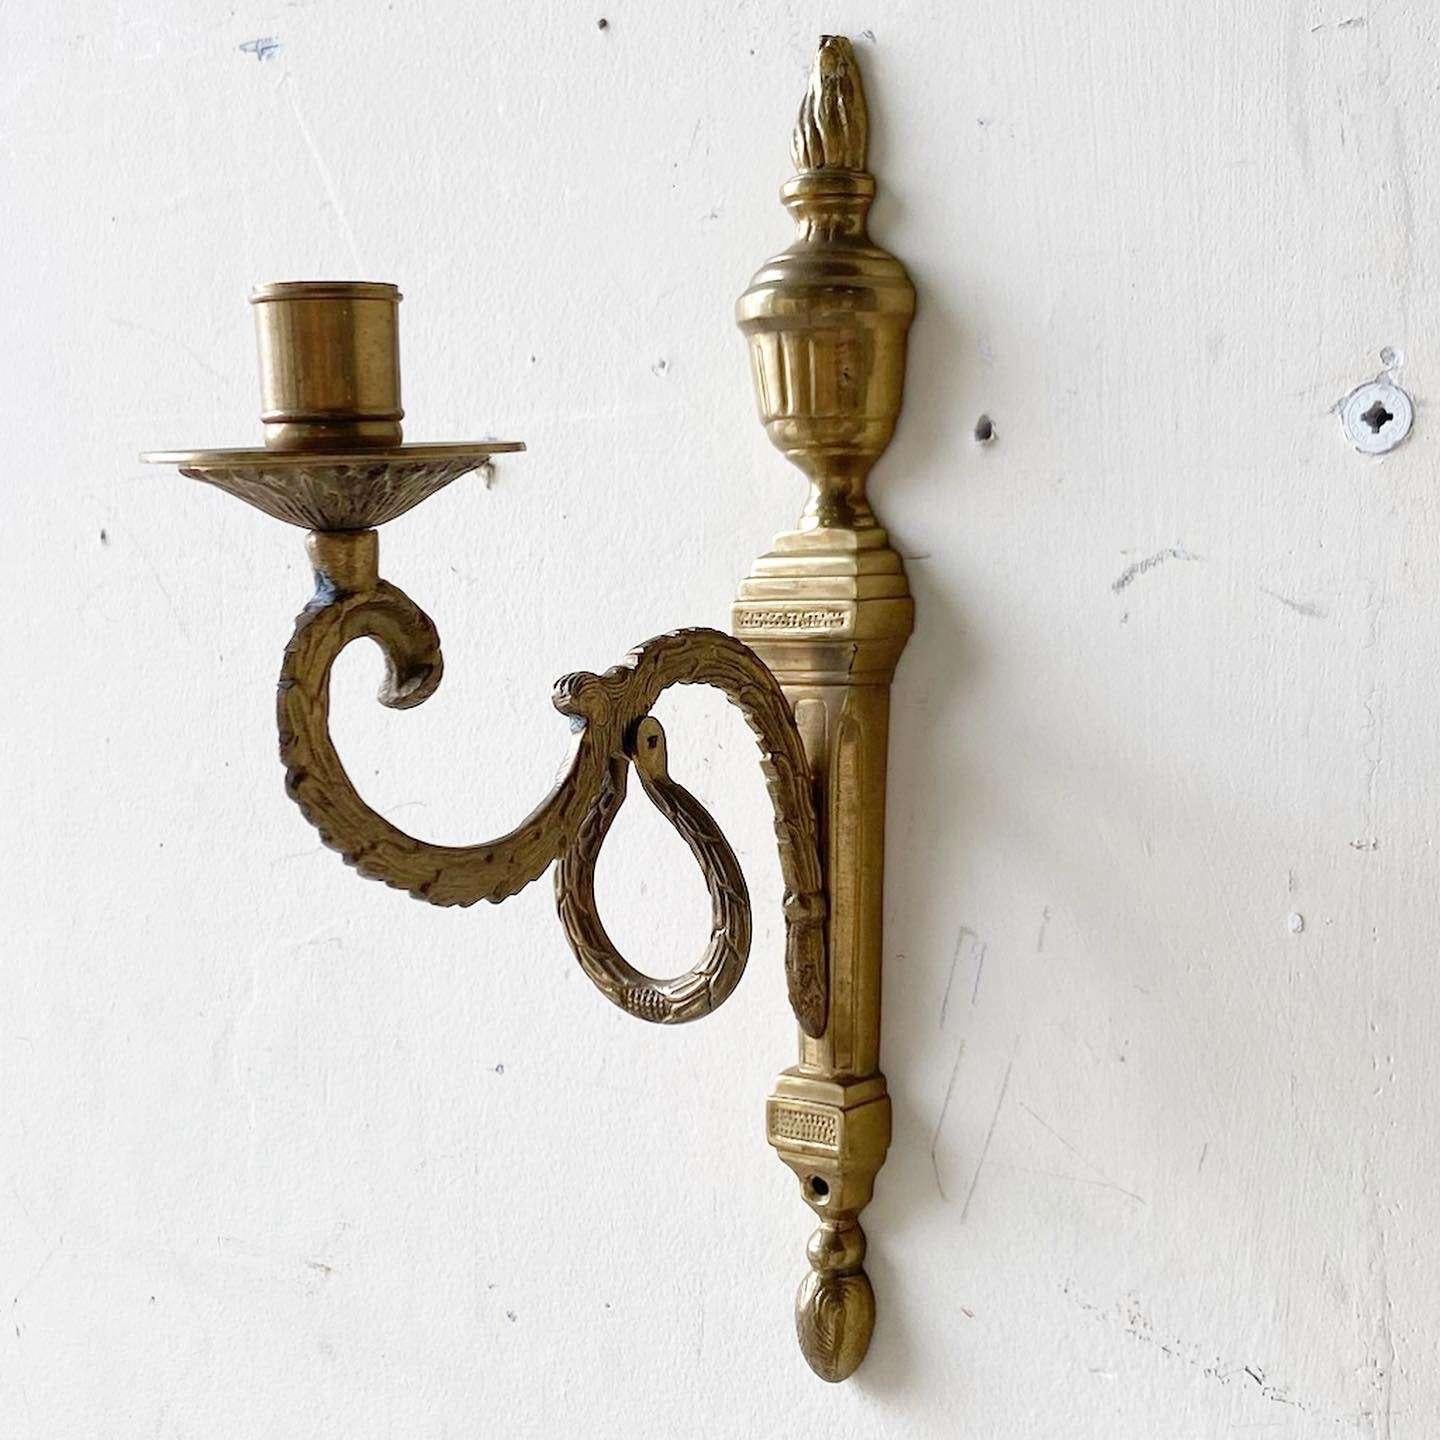 Victorian Ikea Torne VI Wall Sconce Candle Holder For Sale